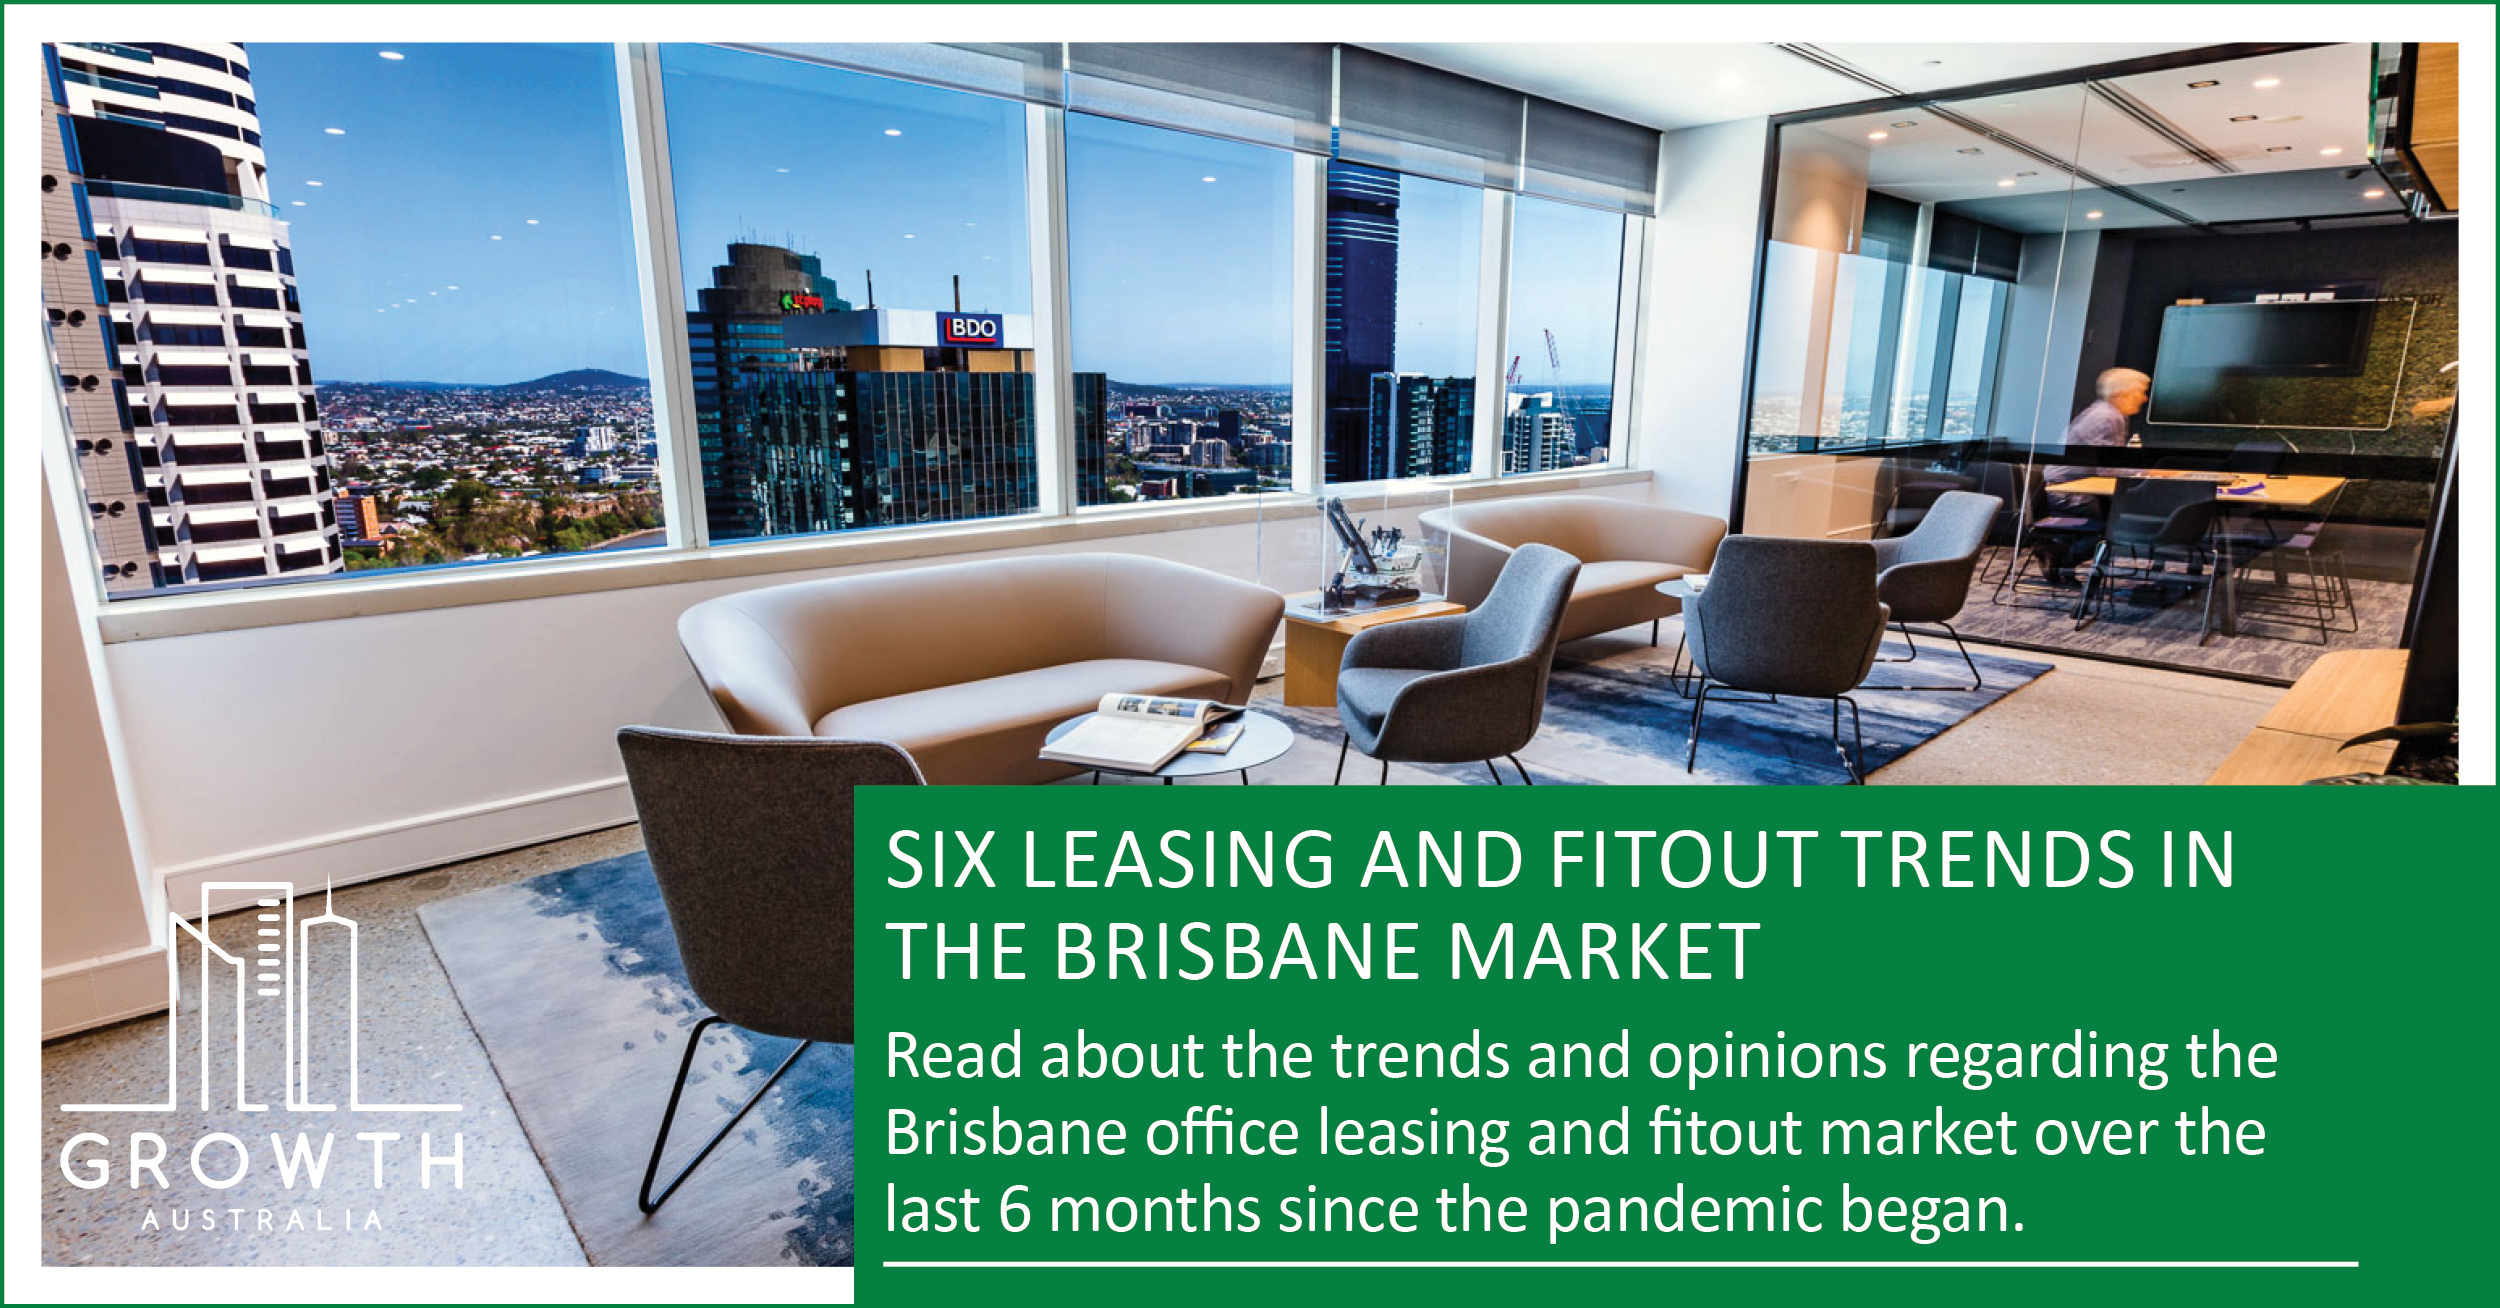 6 leasing and fitout trends we have seen during the pandemic.